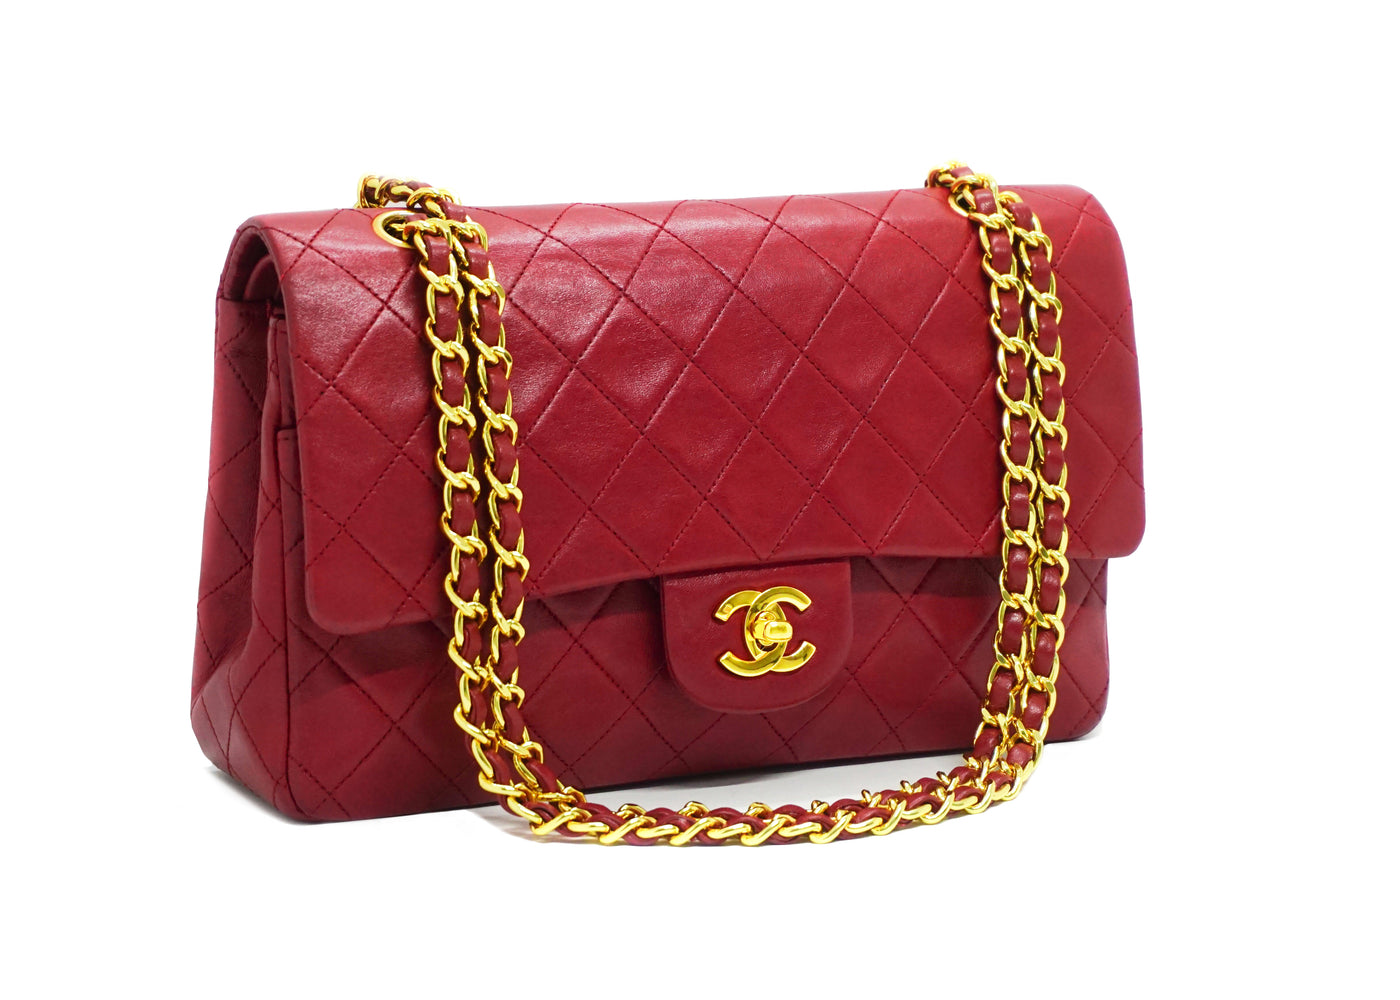 Chanel Vintage Red Lambskin Medium Classic Double Flap